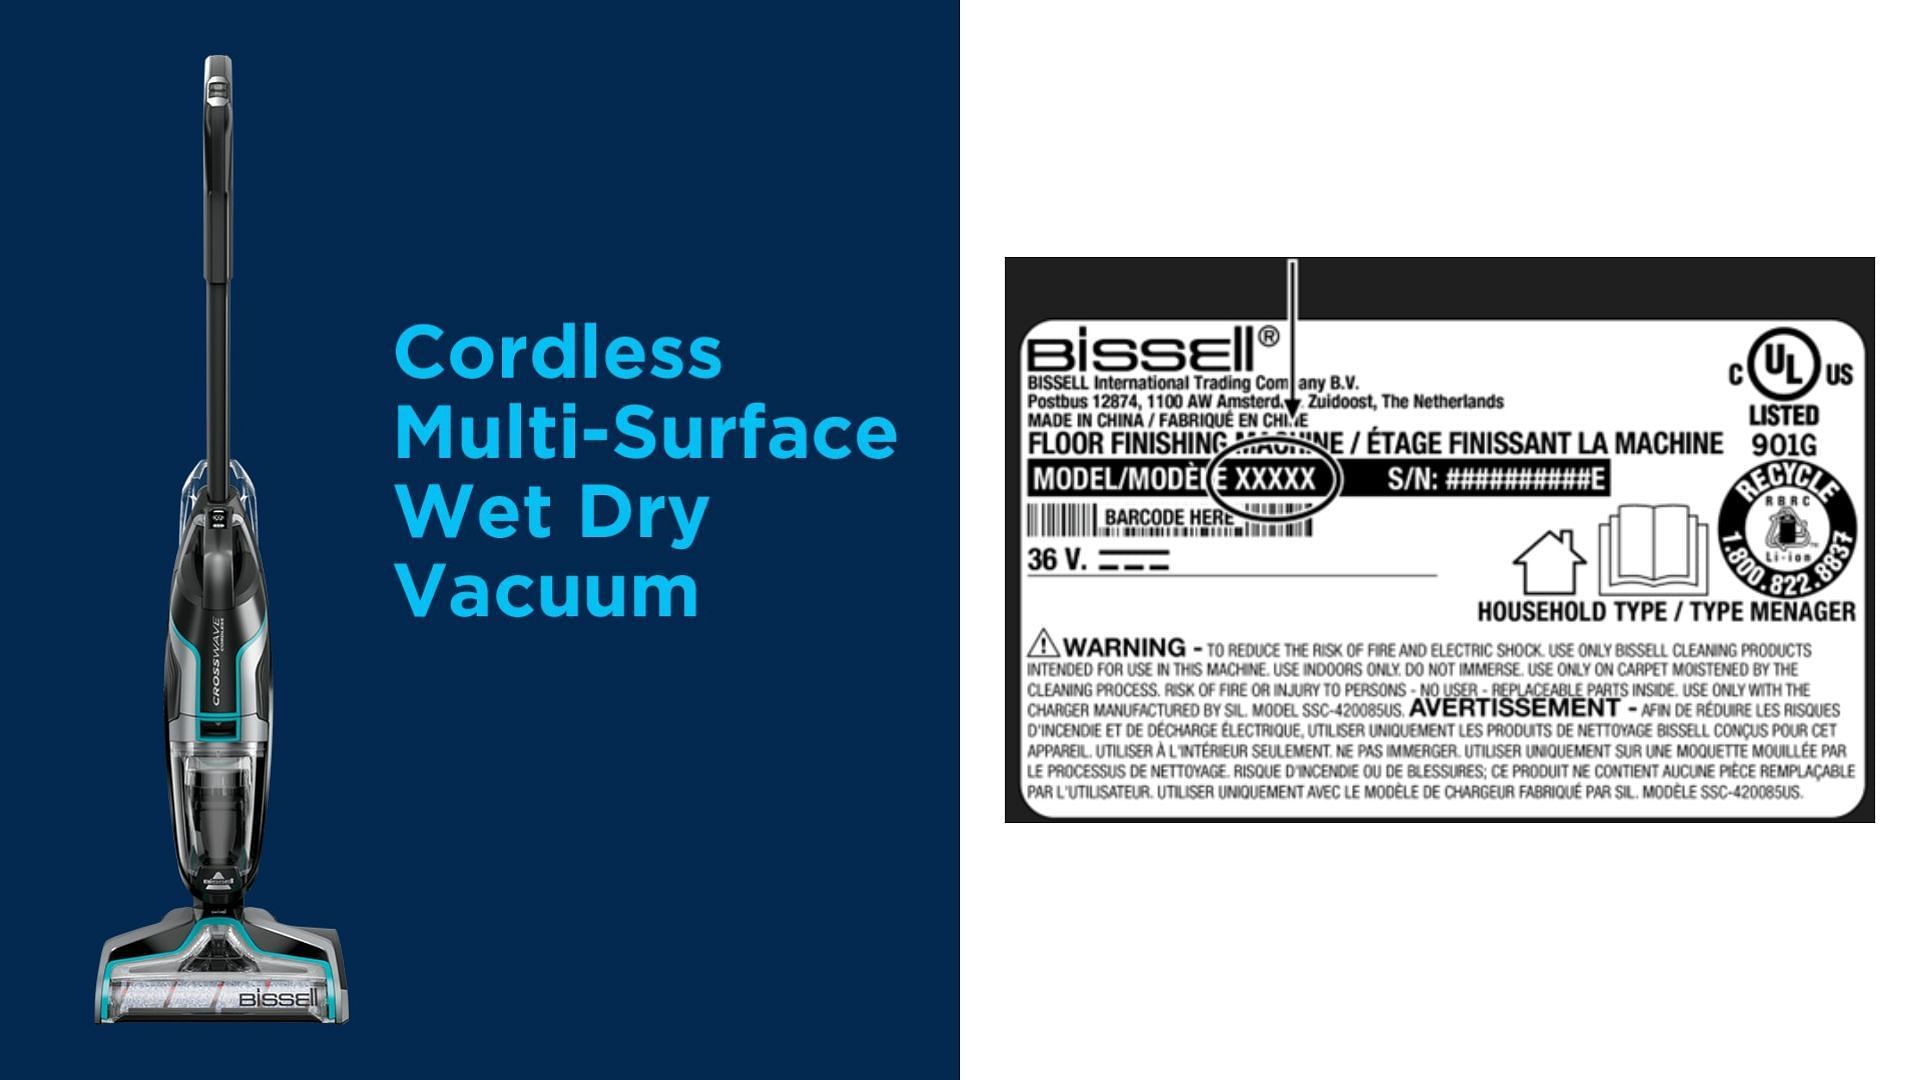 BISSELL Cordless Multi-Surface Wet Dry Vacuums recall: reason